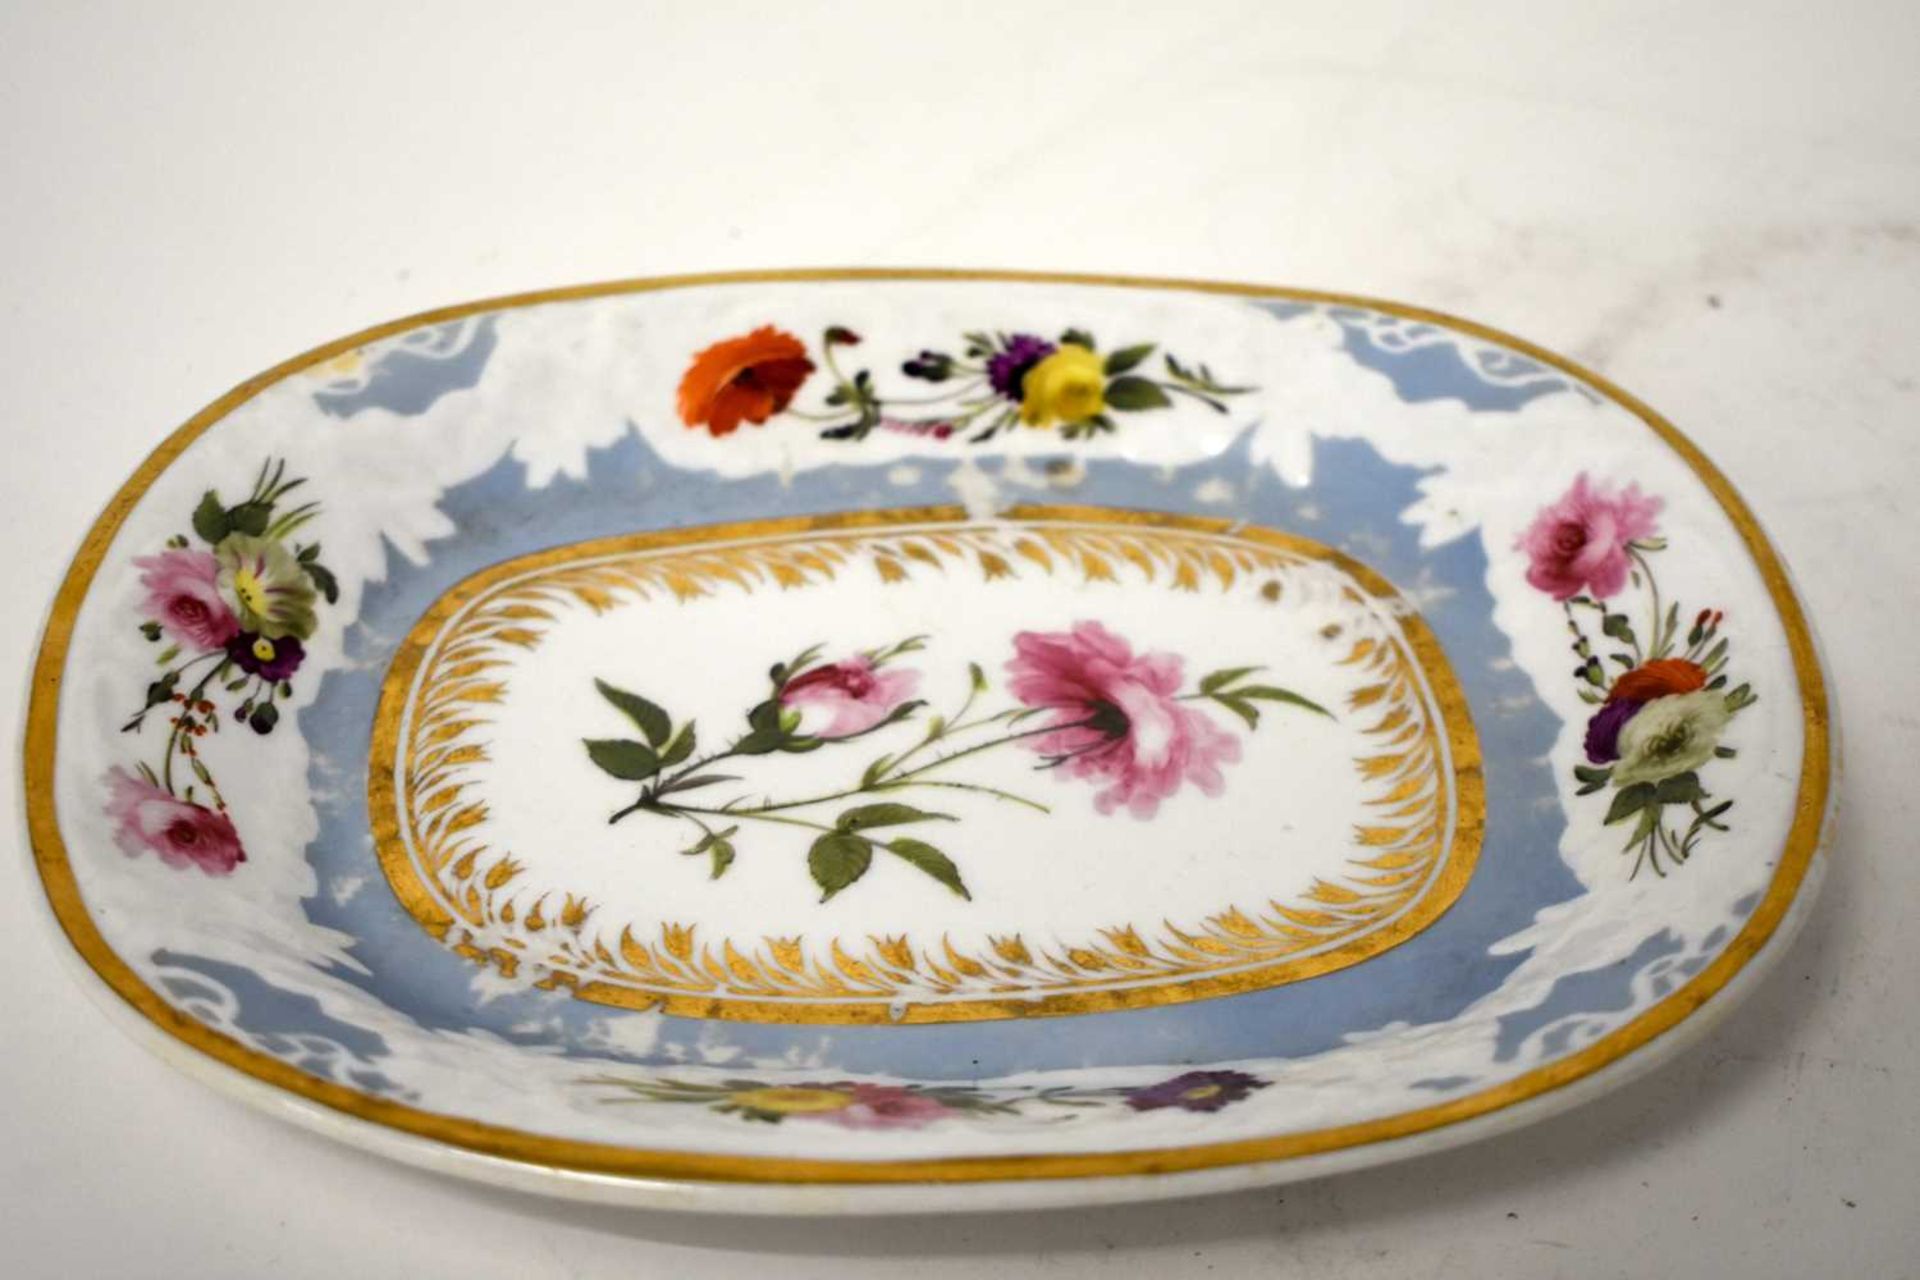 AN EARLY 19TH CENTURY CHAMBERLAINS WORCESTER PART TEASET painted with floral sprays, under a moulded - Image 18 of 36